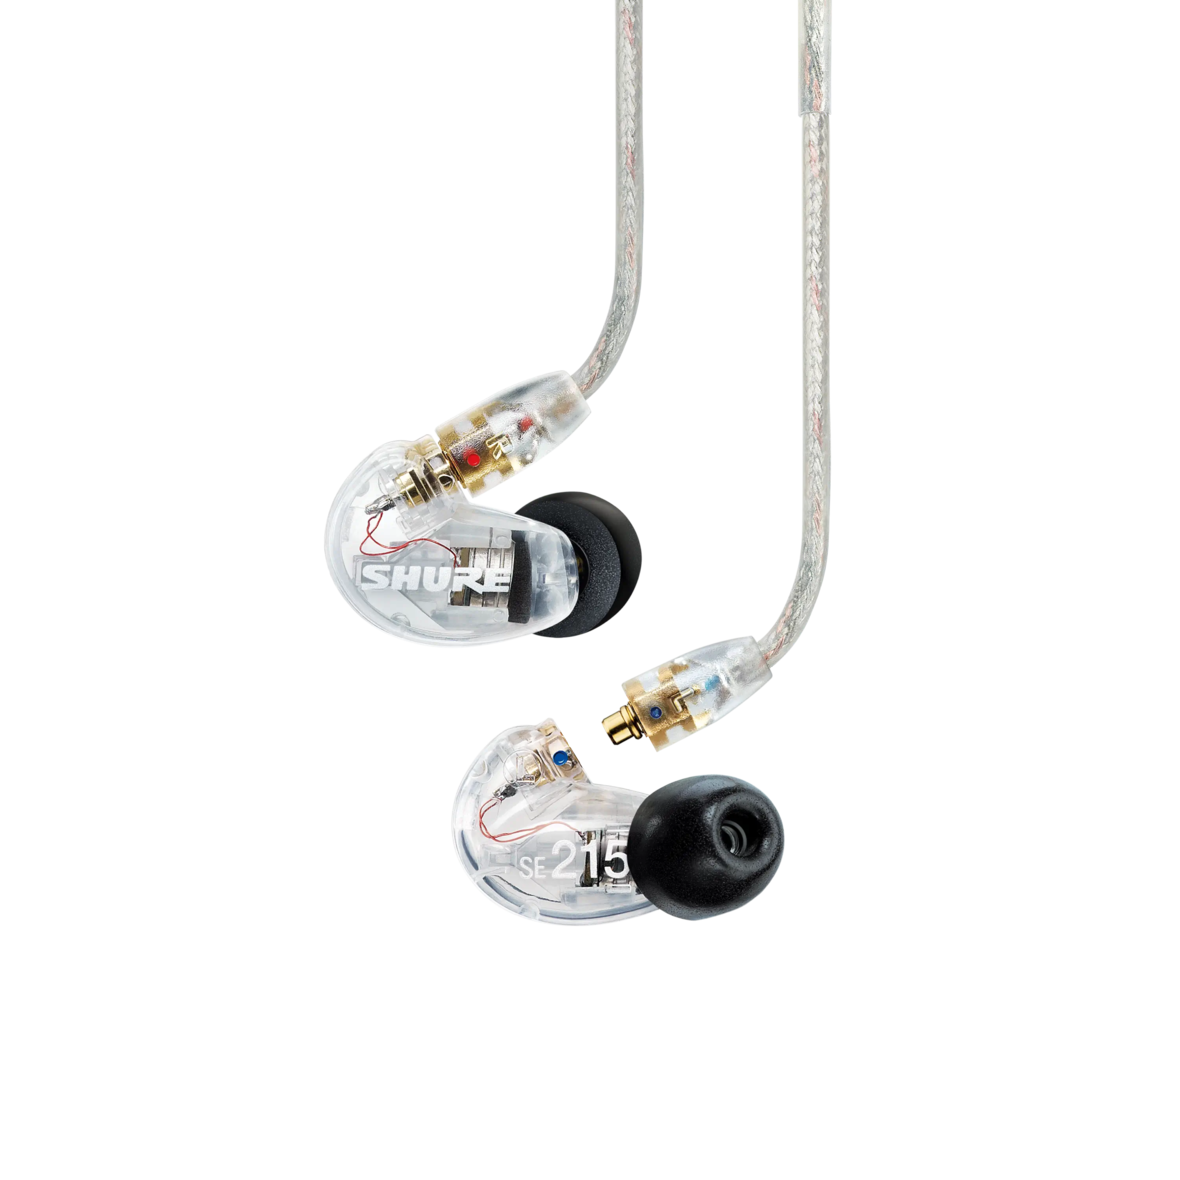 SE215 Wired - Sound Isolating™ Earphones - Shure USA